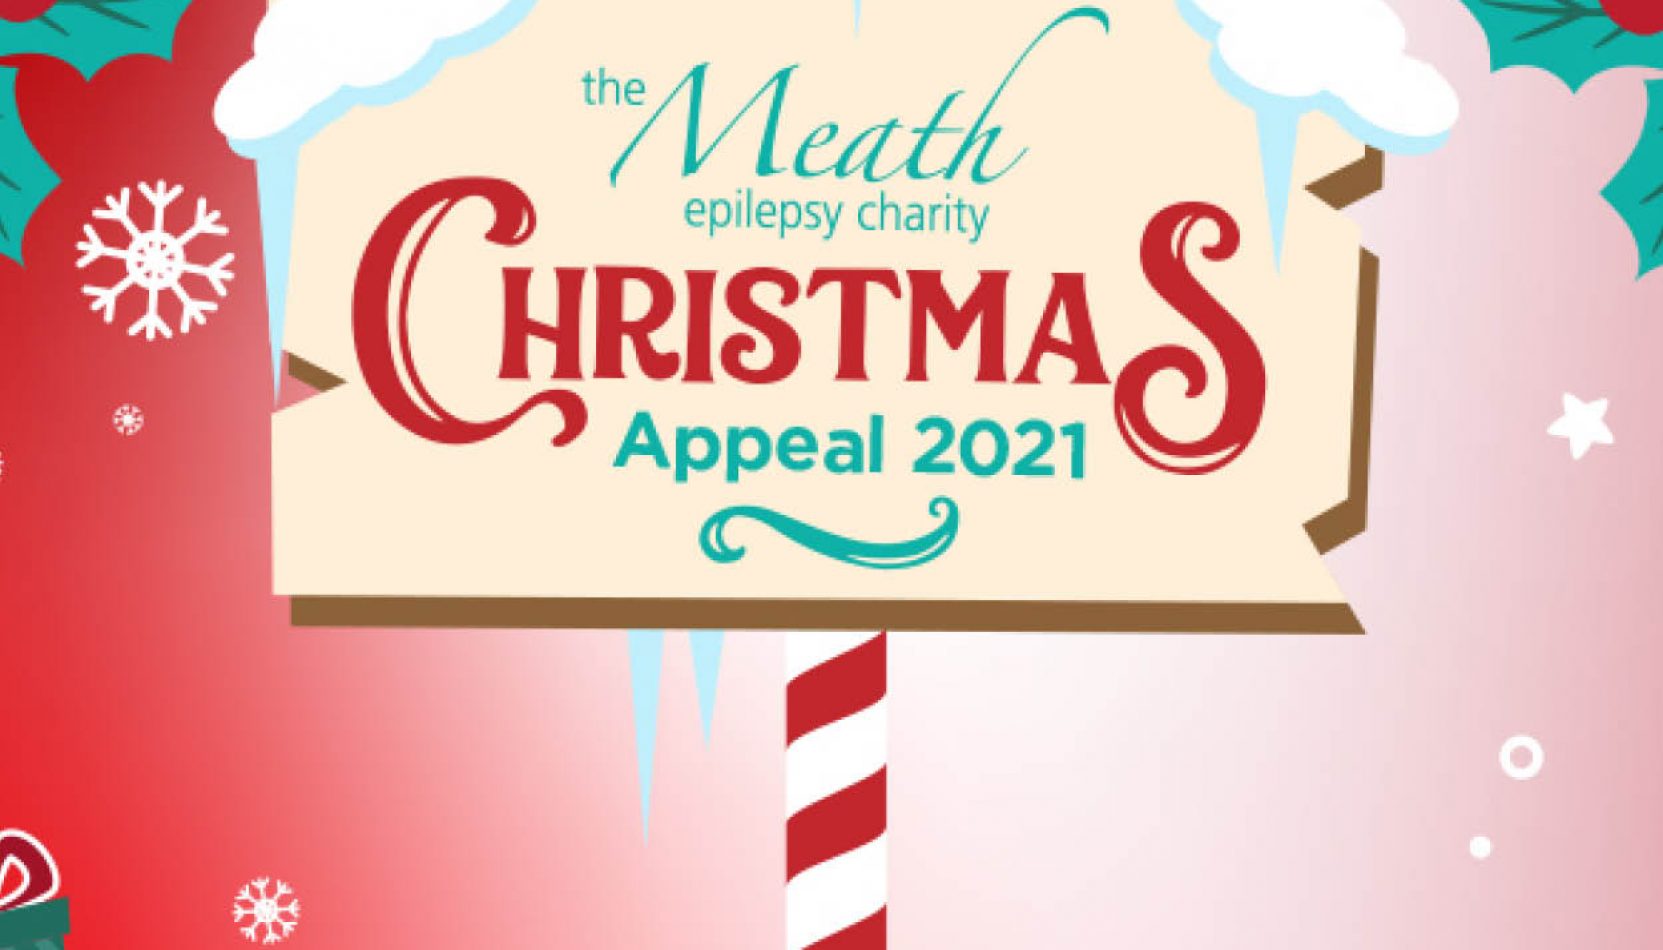 meath epilepsy charity christmas appeal 2021,